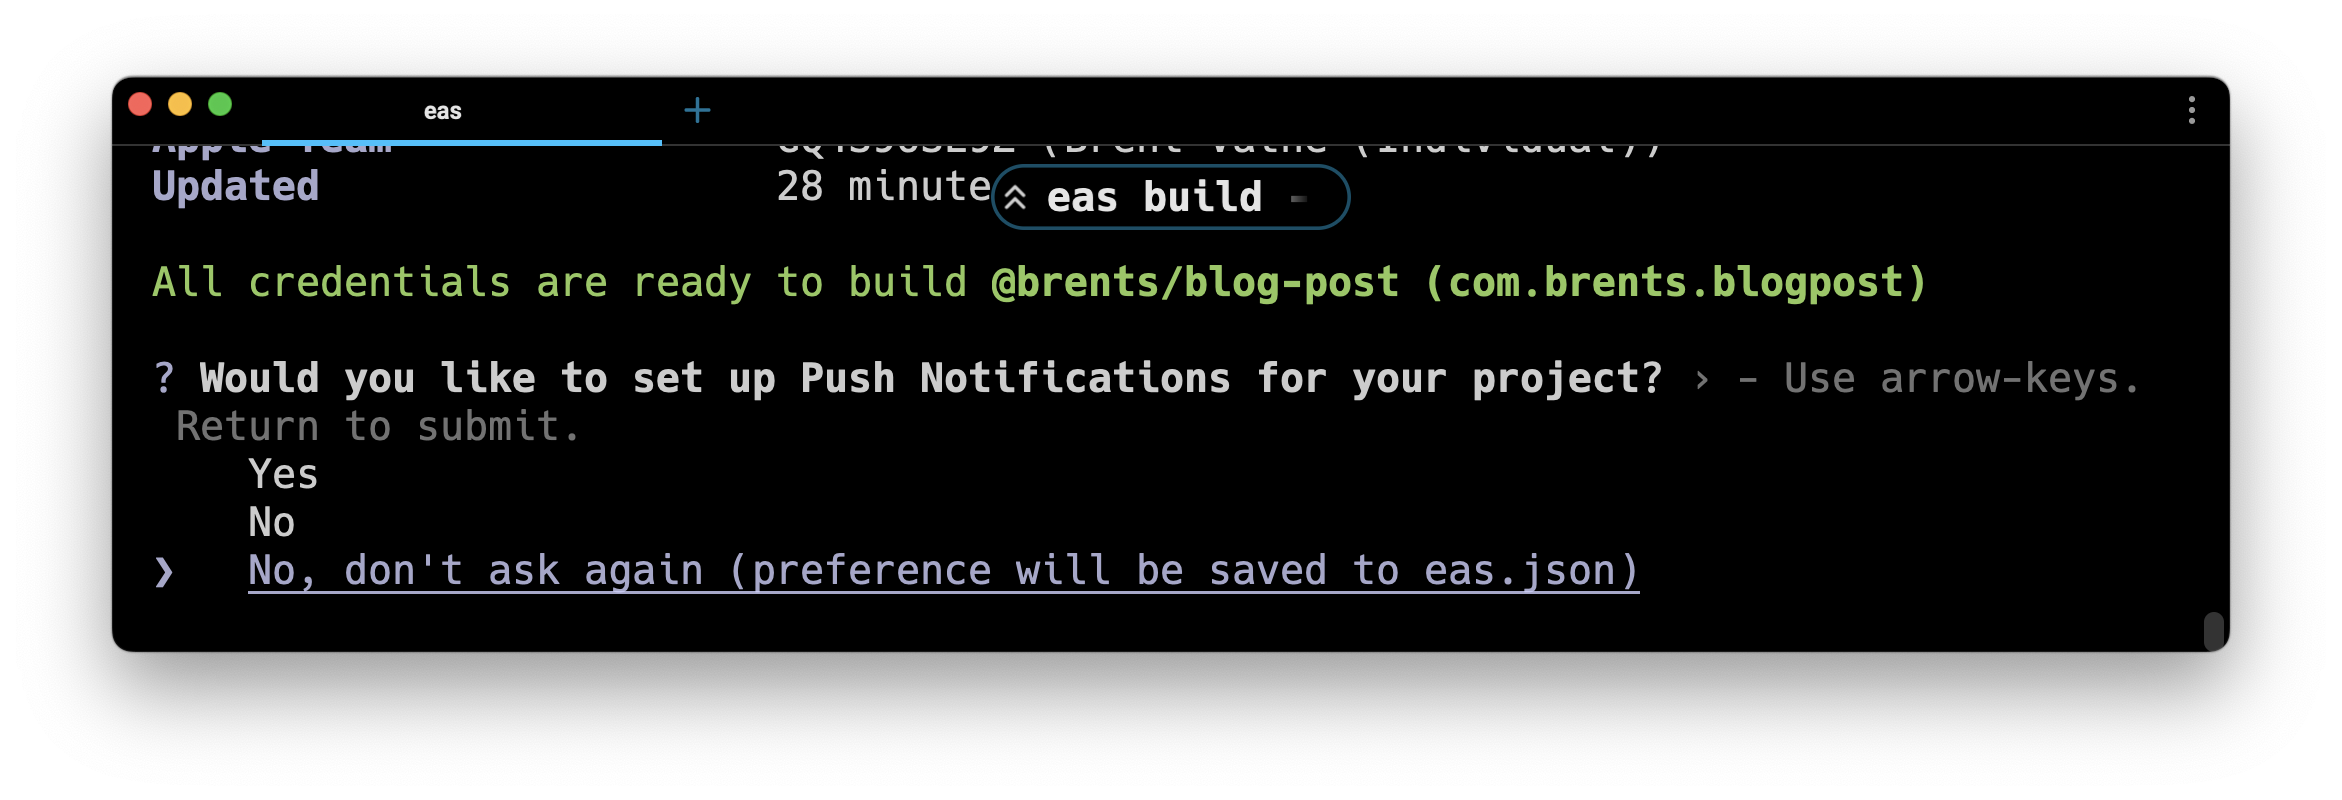 CLI prompt for adding push notificaitons to an expo project